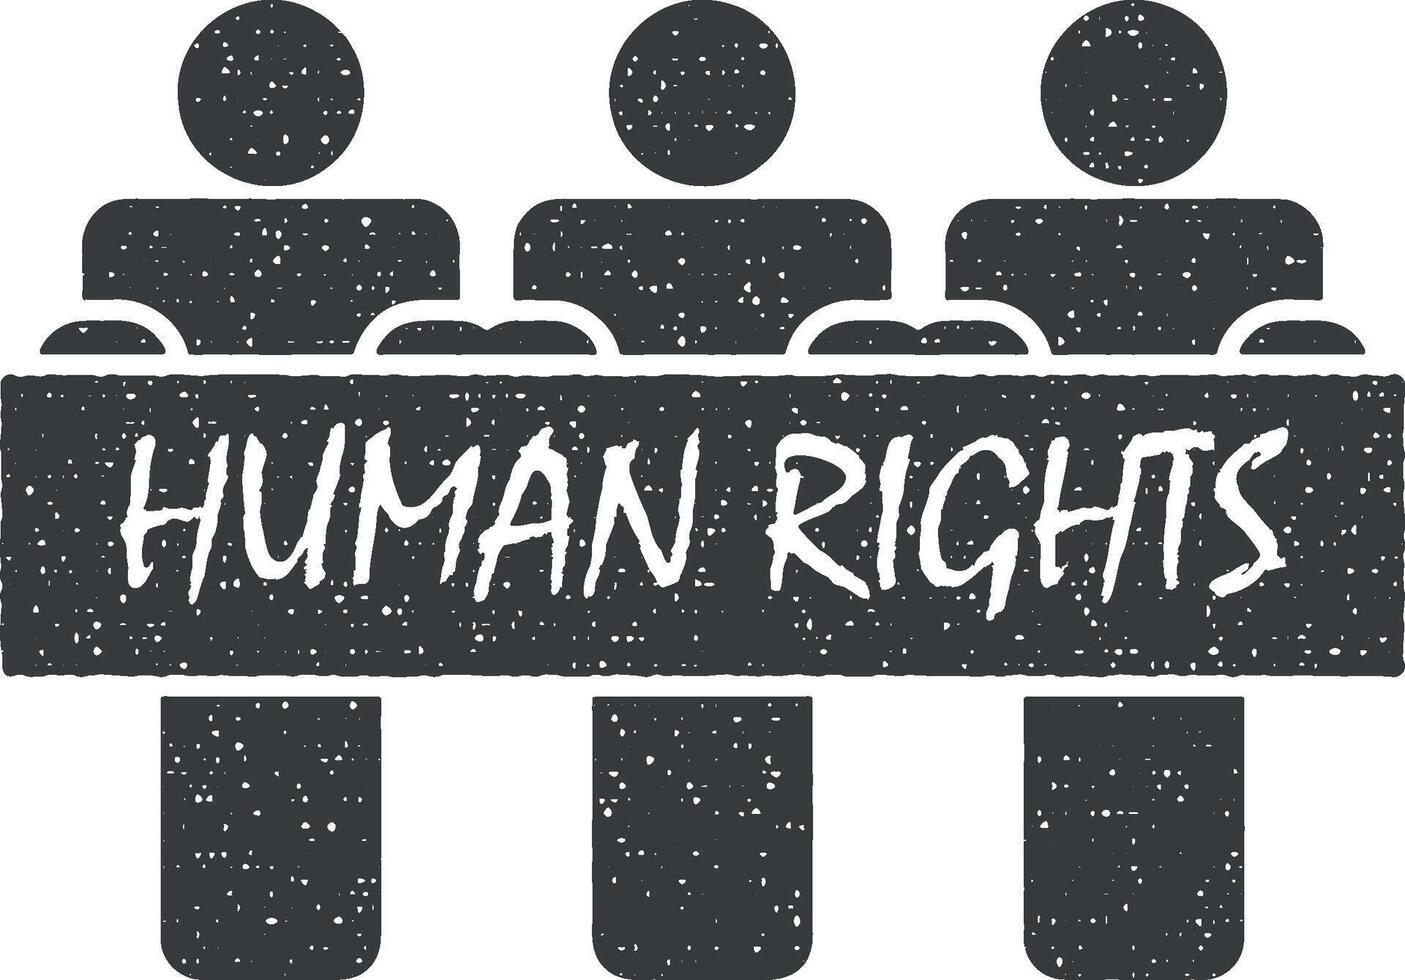 people for human rights vector icon illustration with stamp effect